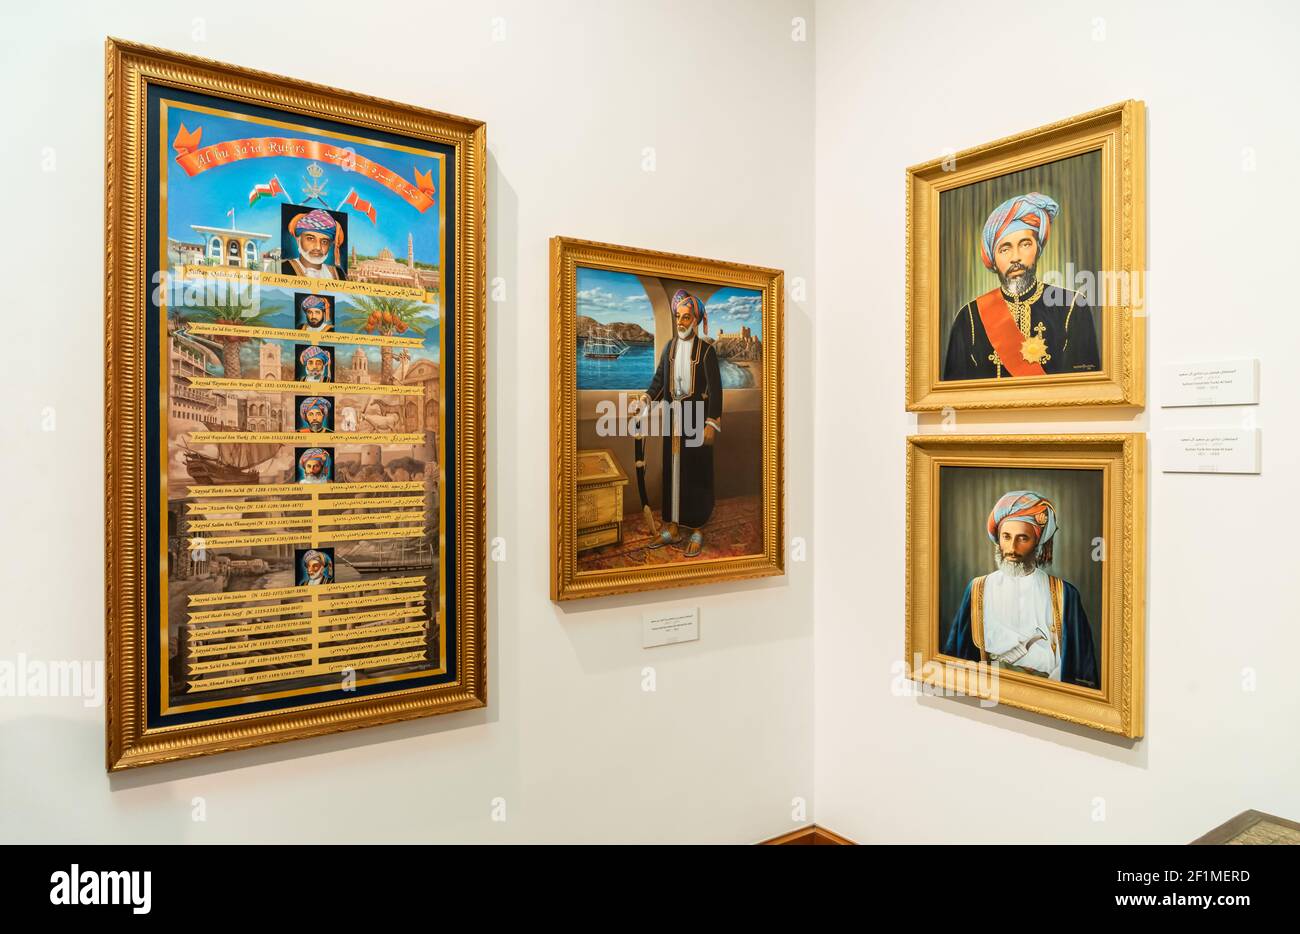 Muscat, Oman - February 10, 2020: Portraits of Sultan Qaboos and his royal family inside the Bait Al Zubair Museum in old Muscat or Sultanate of Oman Stock Photo